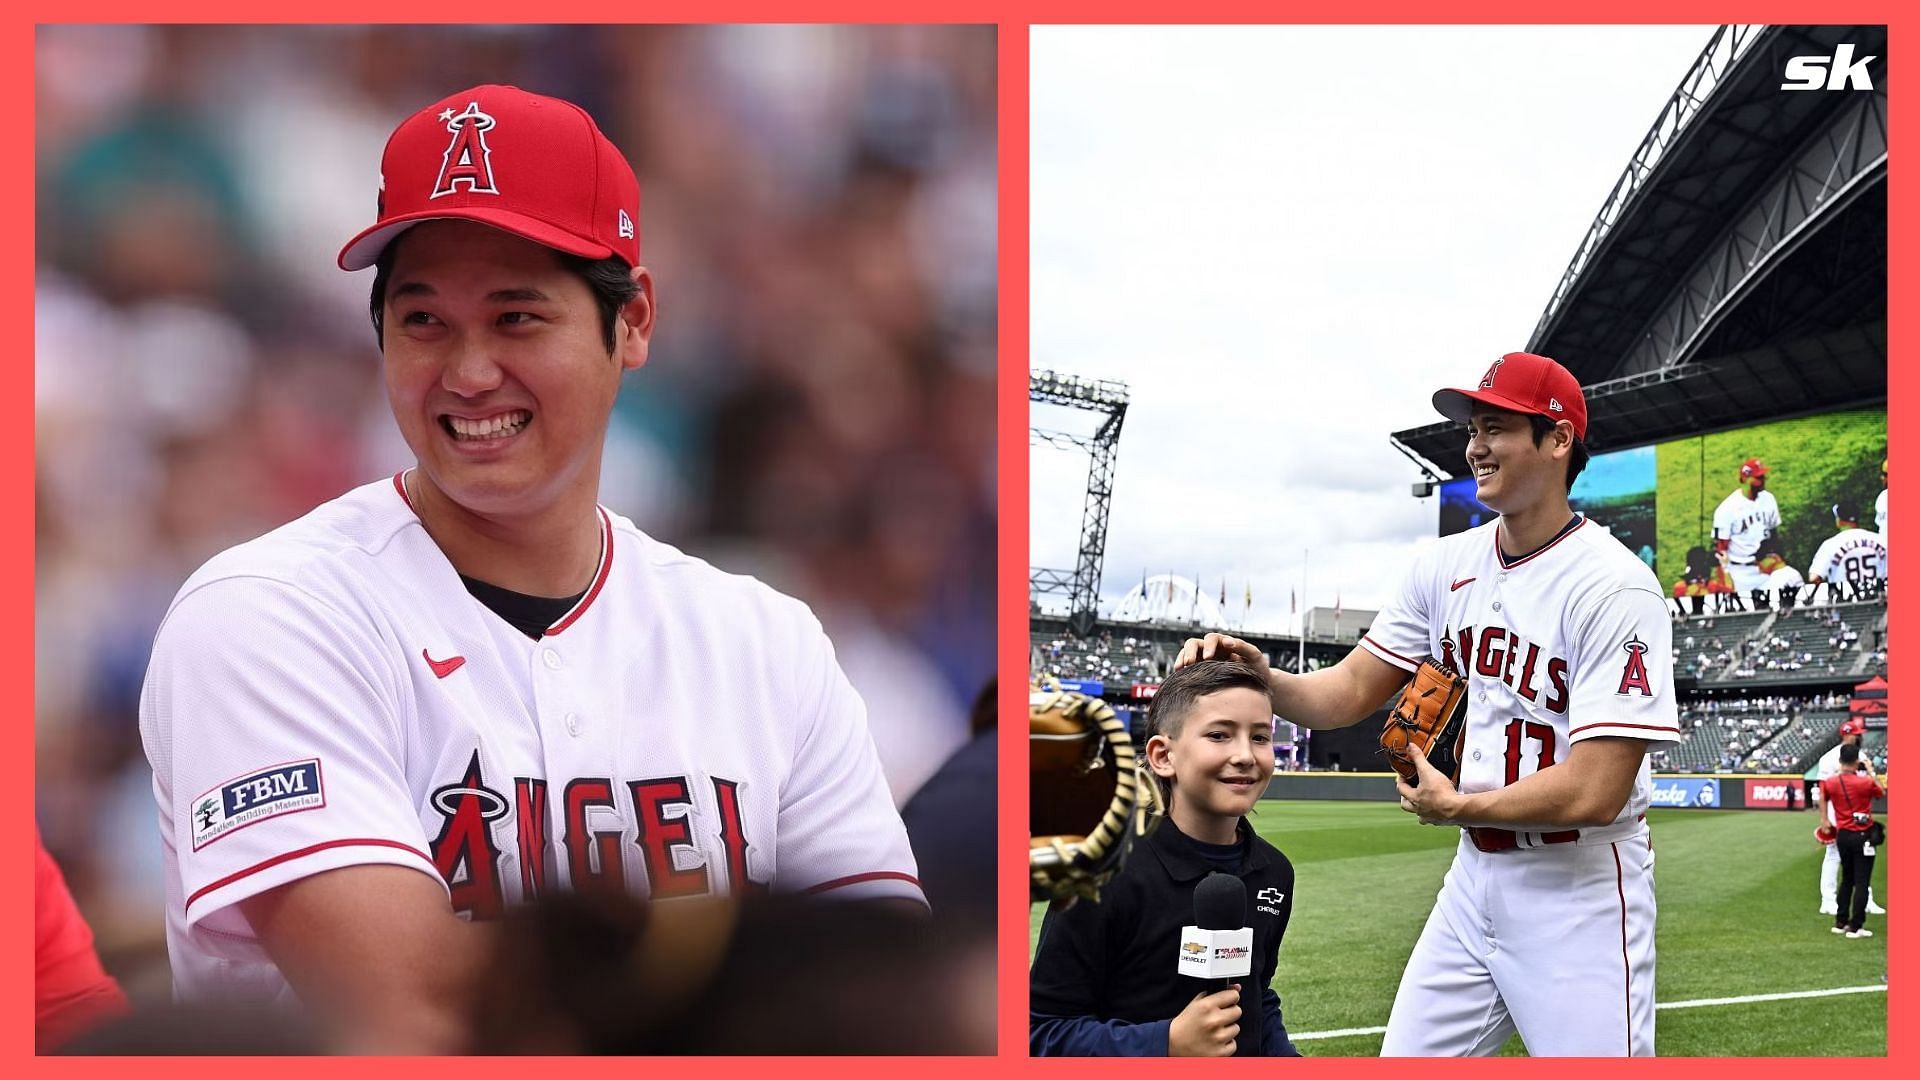 Shohei Ohtani giving an interview during the MLB All Star Workout Day.